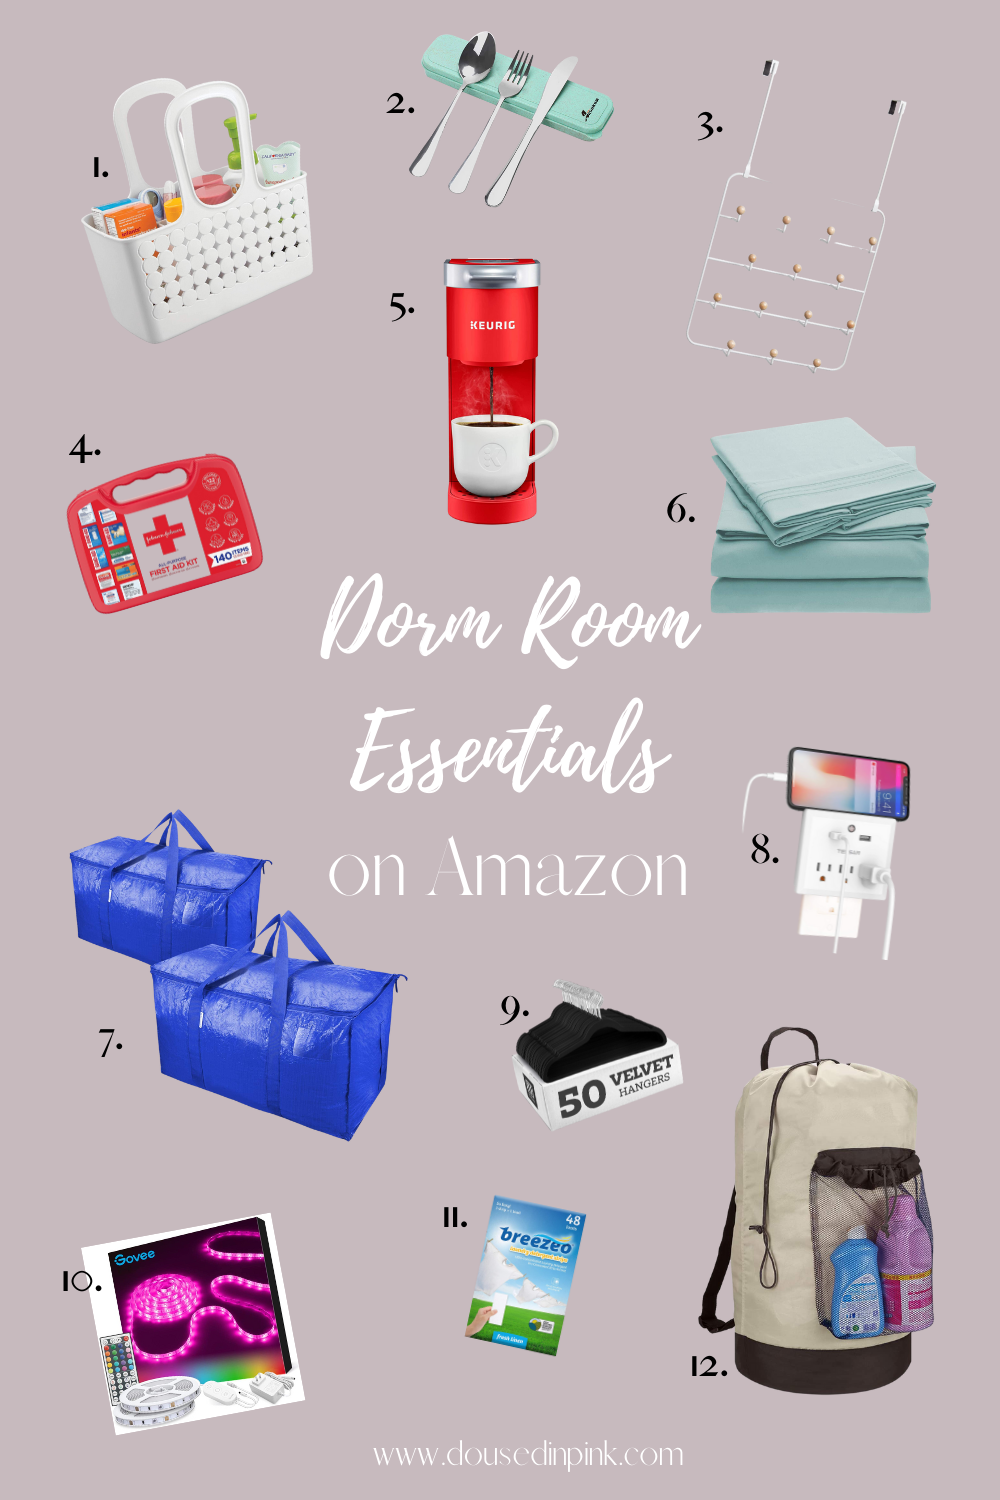 https://www.dousedinpink.com/wp-content/uploads/2021/08/Amazon-Back-to-School-1.png